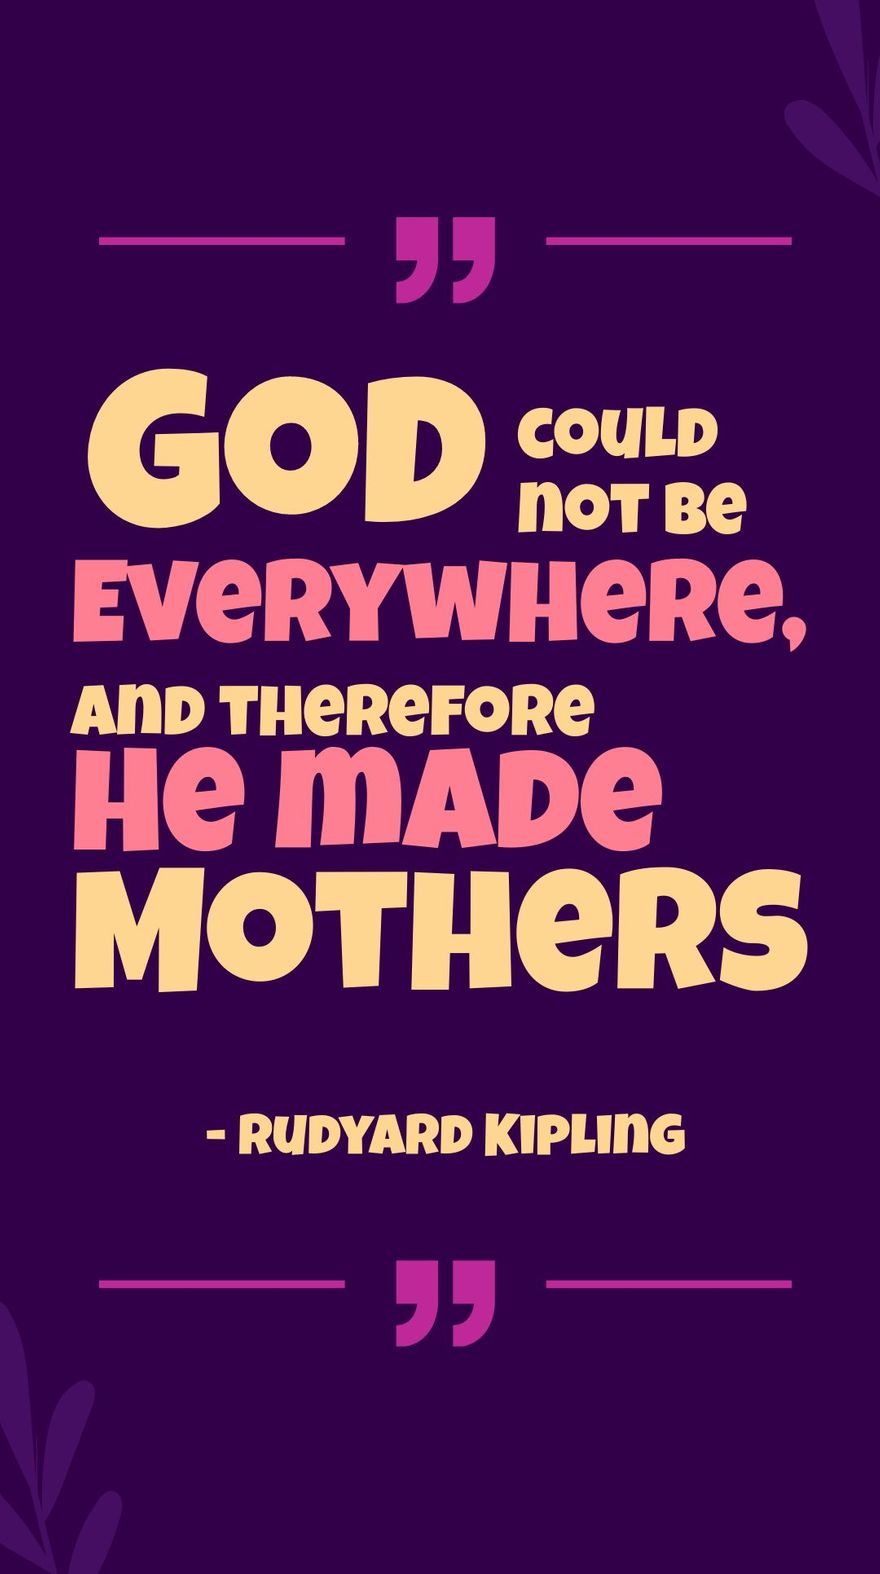 Rudyard Kipling - God could not be everywhere, and therefore he made mothers. 